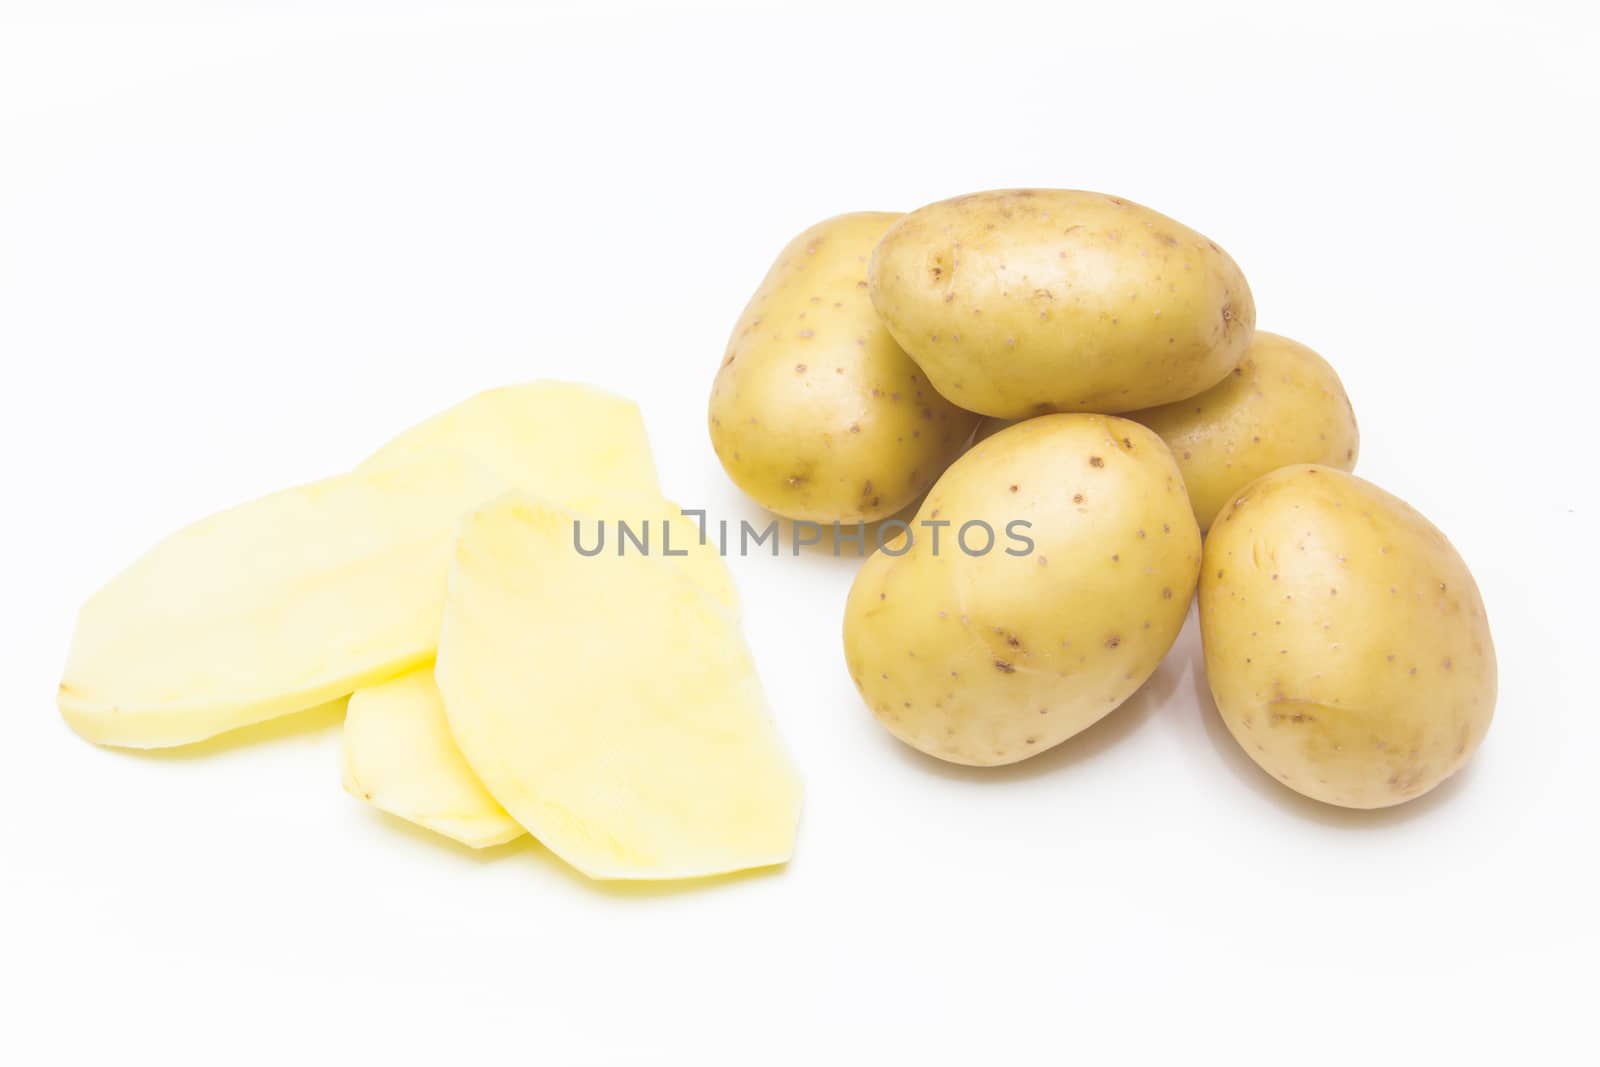 Potatoes sliced by spafra